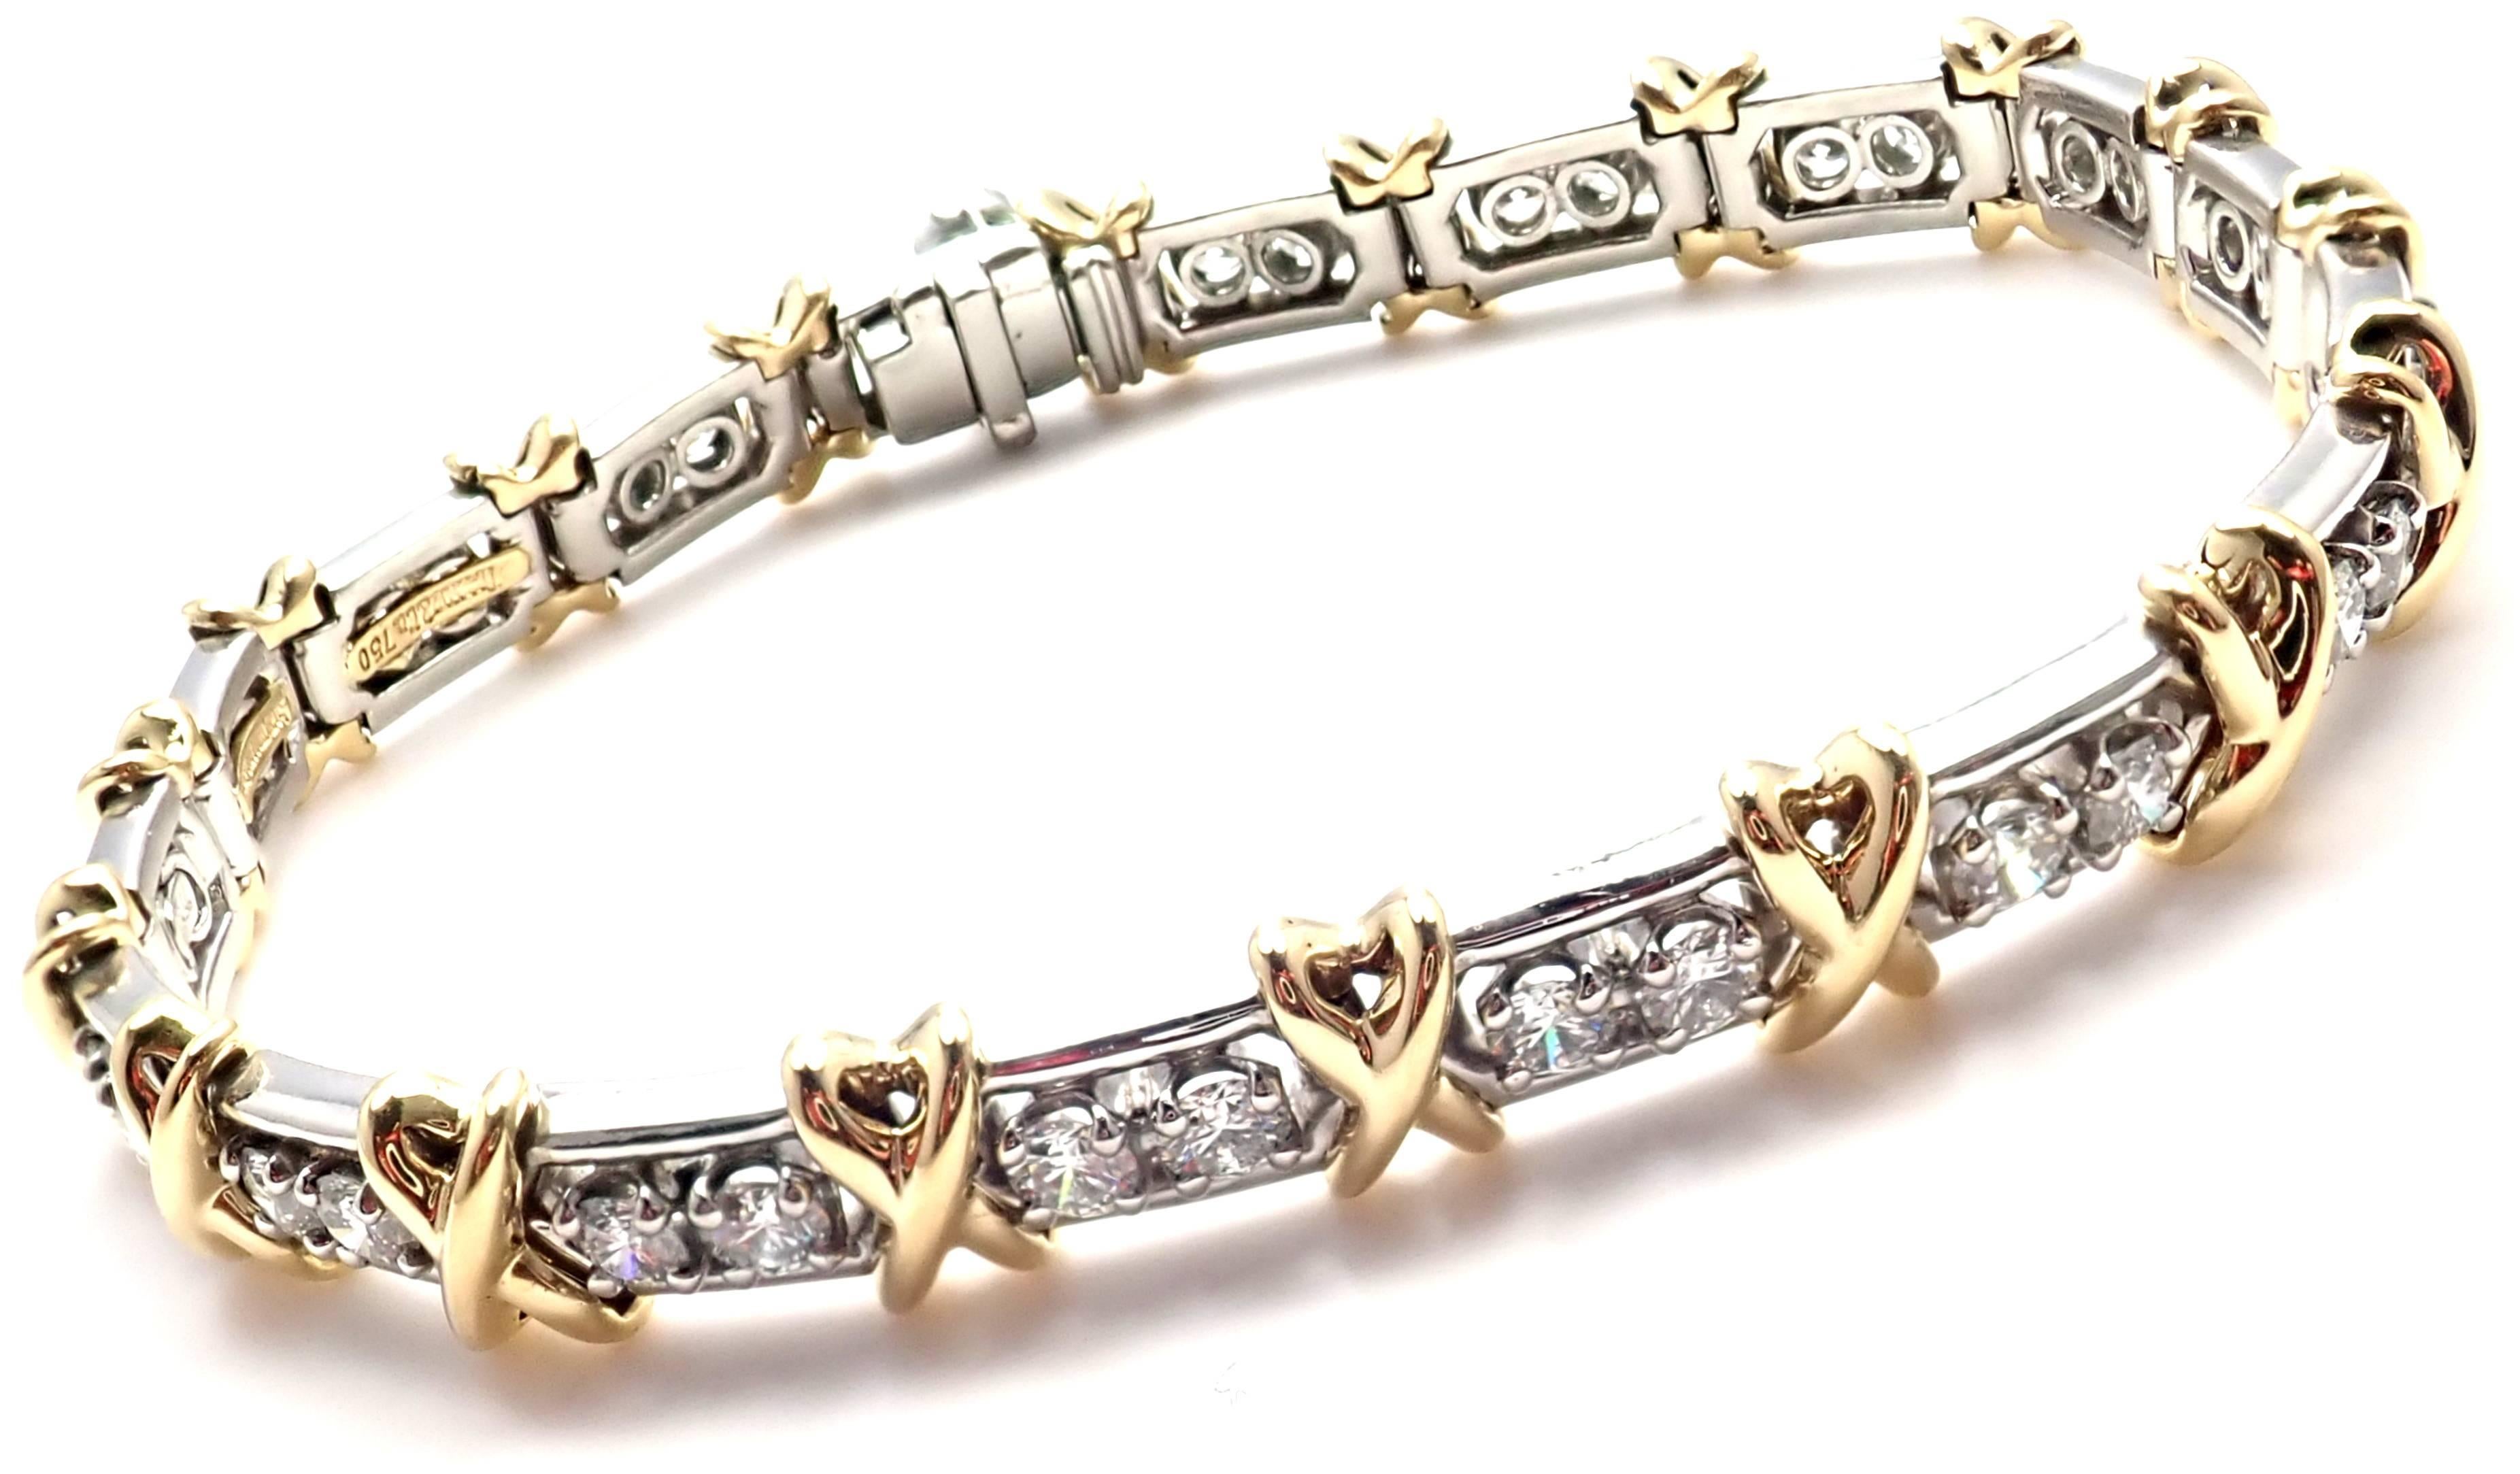 18k Yellow Gold & Platinum 36-Stone Diamond Bracelet by Jean Schlumberger for Tiffany & Co. 
With 36 ground brilliant cut diamonds VS1 clarity, G color total weight approx. 2.95ct
Details: 
Weight: 25 grams
Length: 7